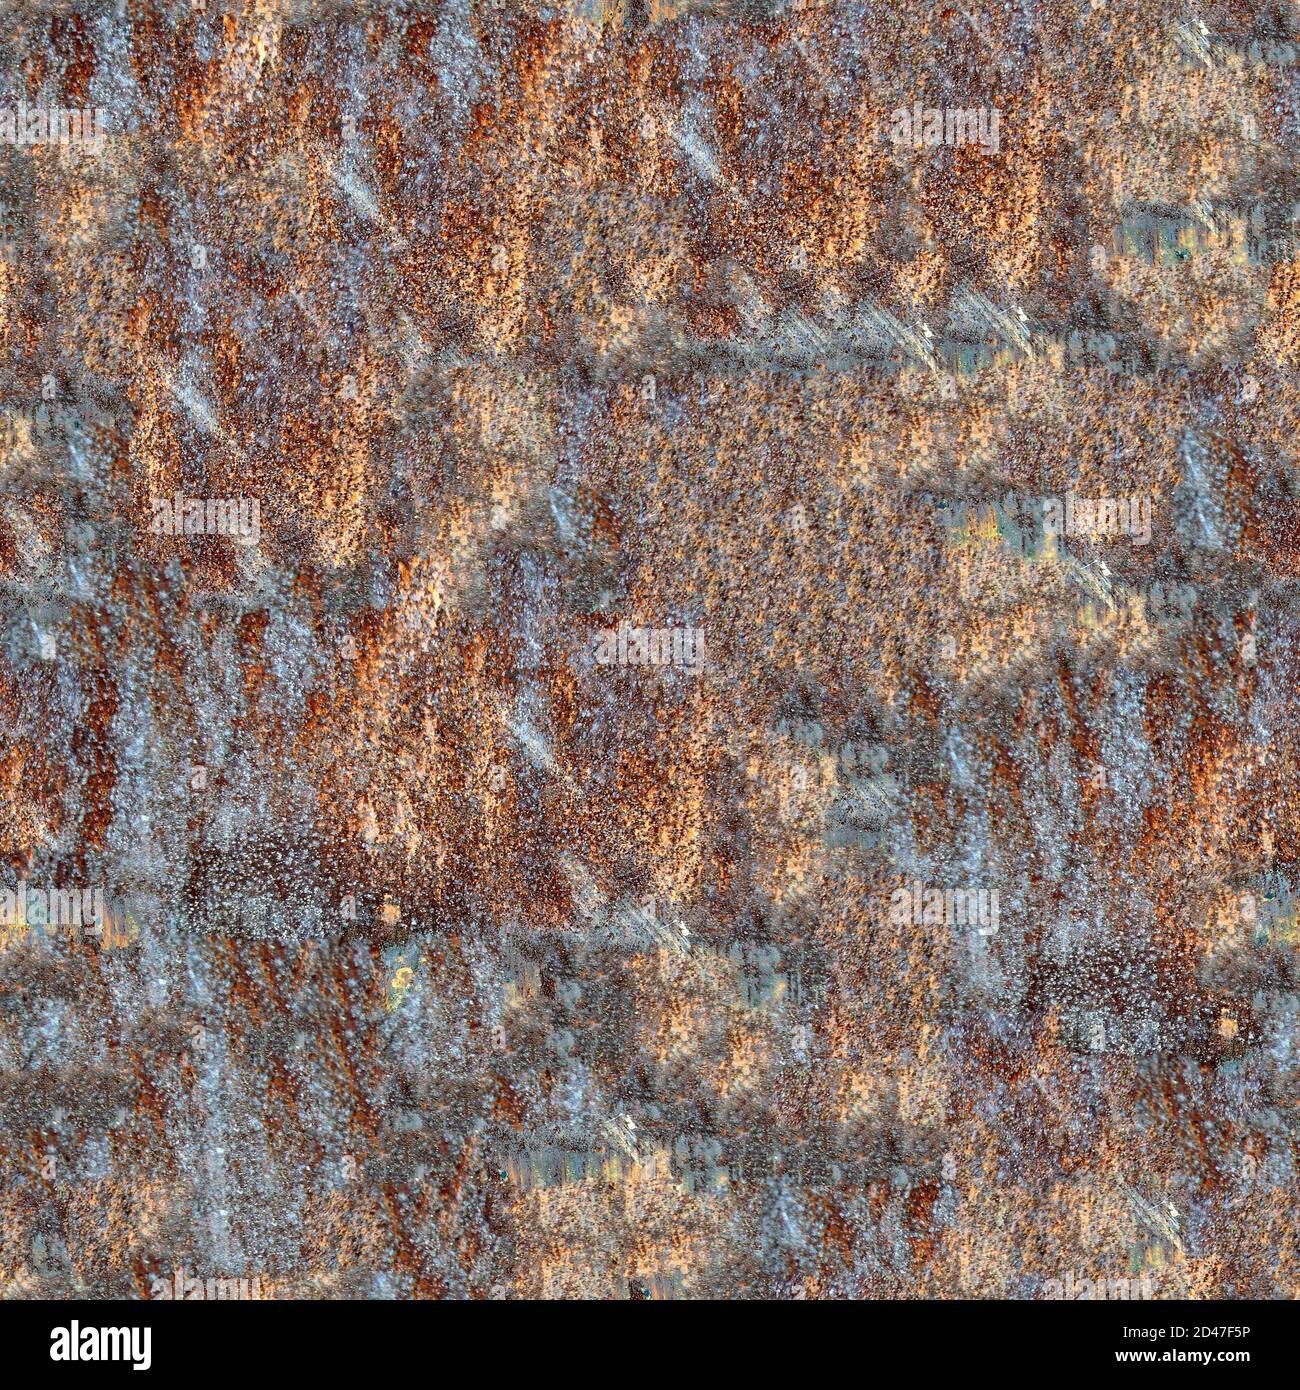 Seamless Metal Texture With Rust Cover And Empty Place For Your Text Or Image Stock Photo Alamy